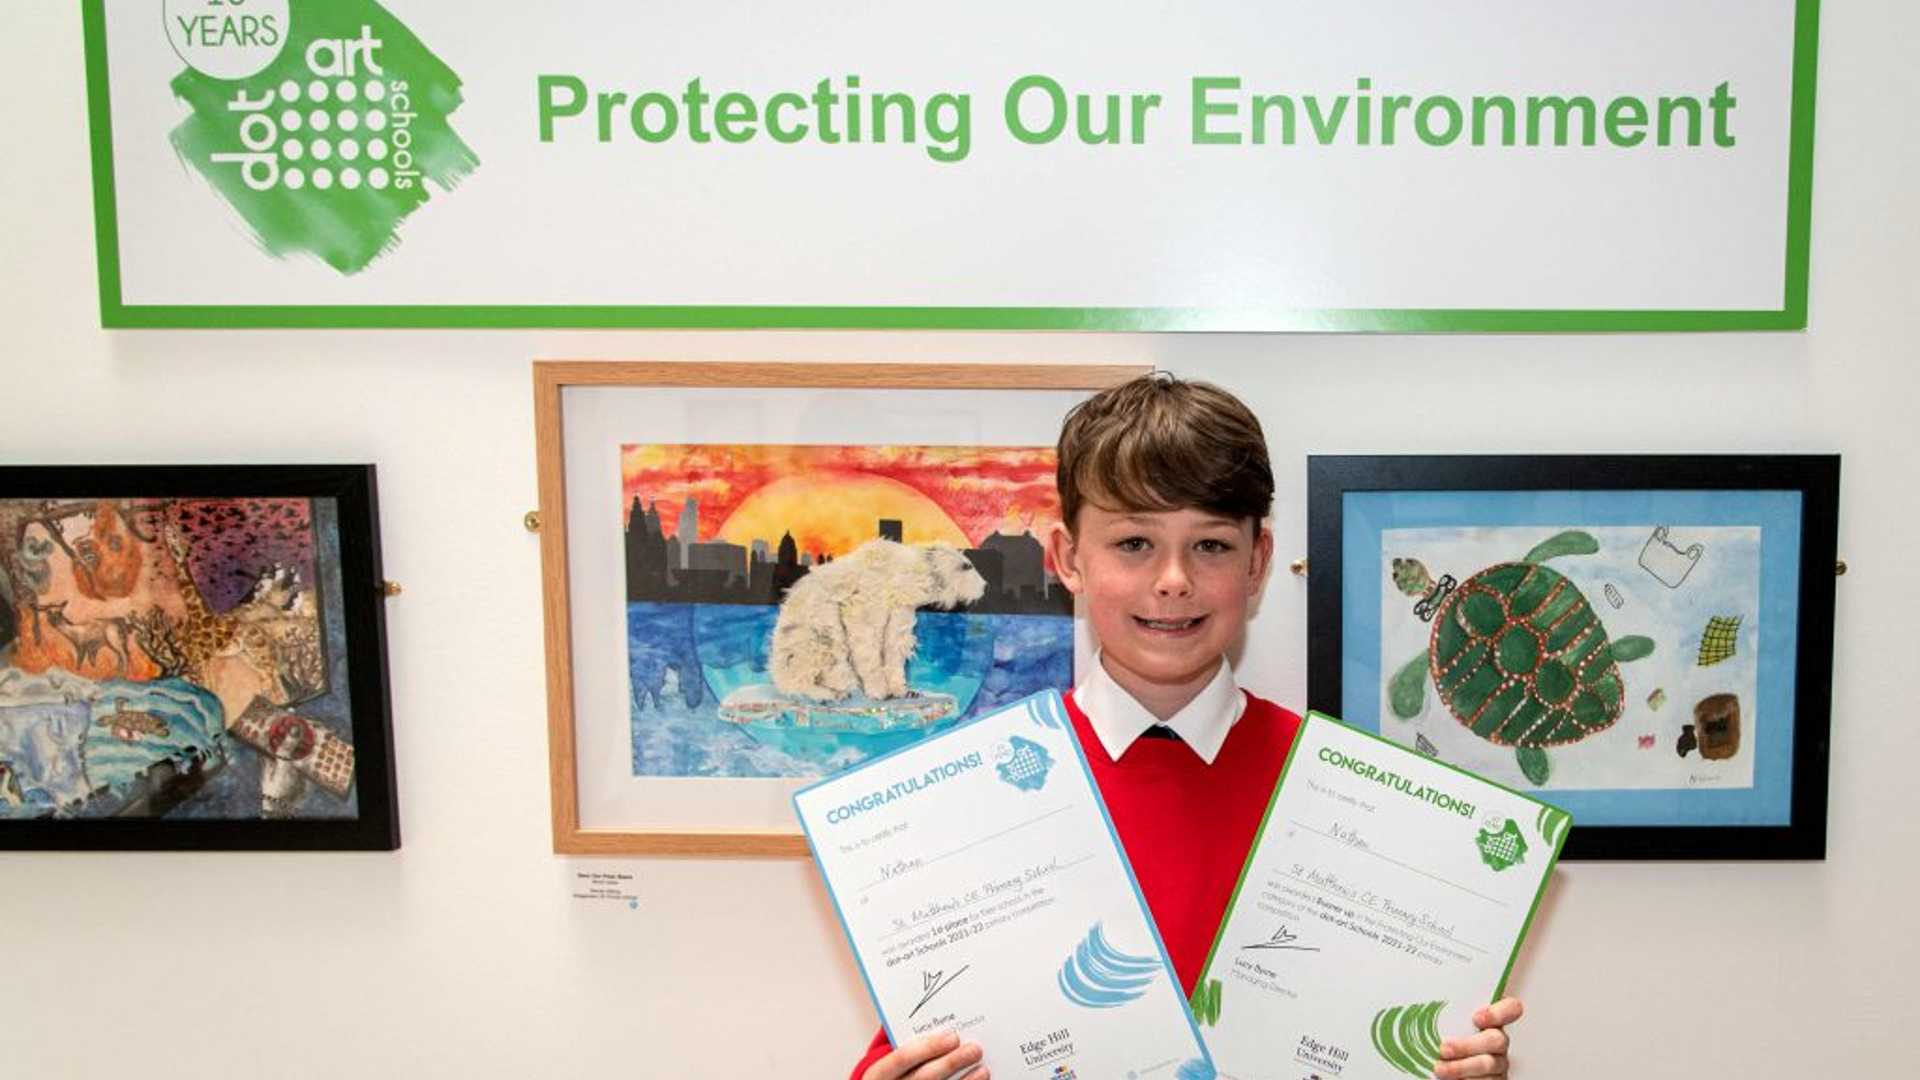 One of the dot art school art competition winners holding two certificates and looking pleased.